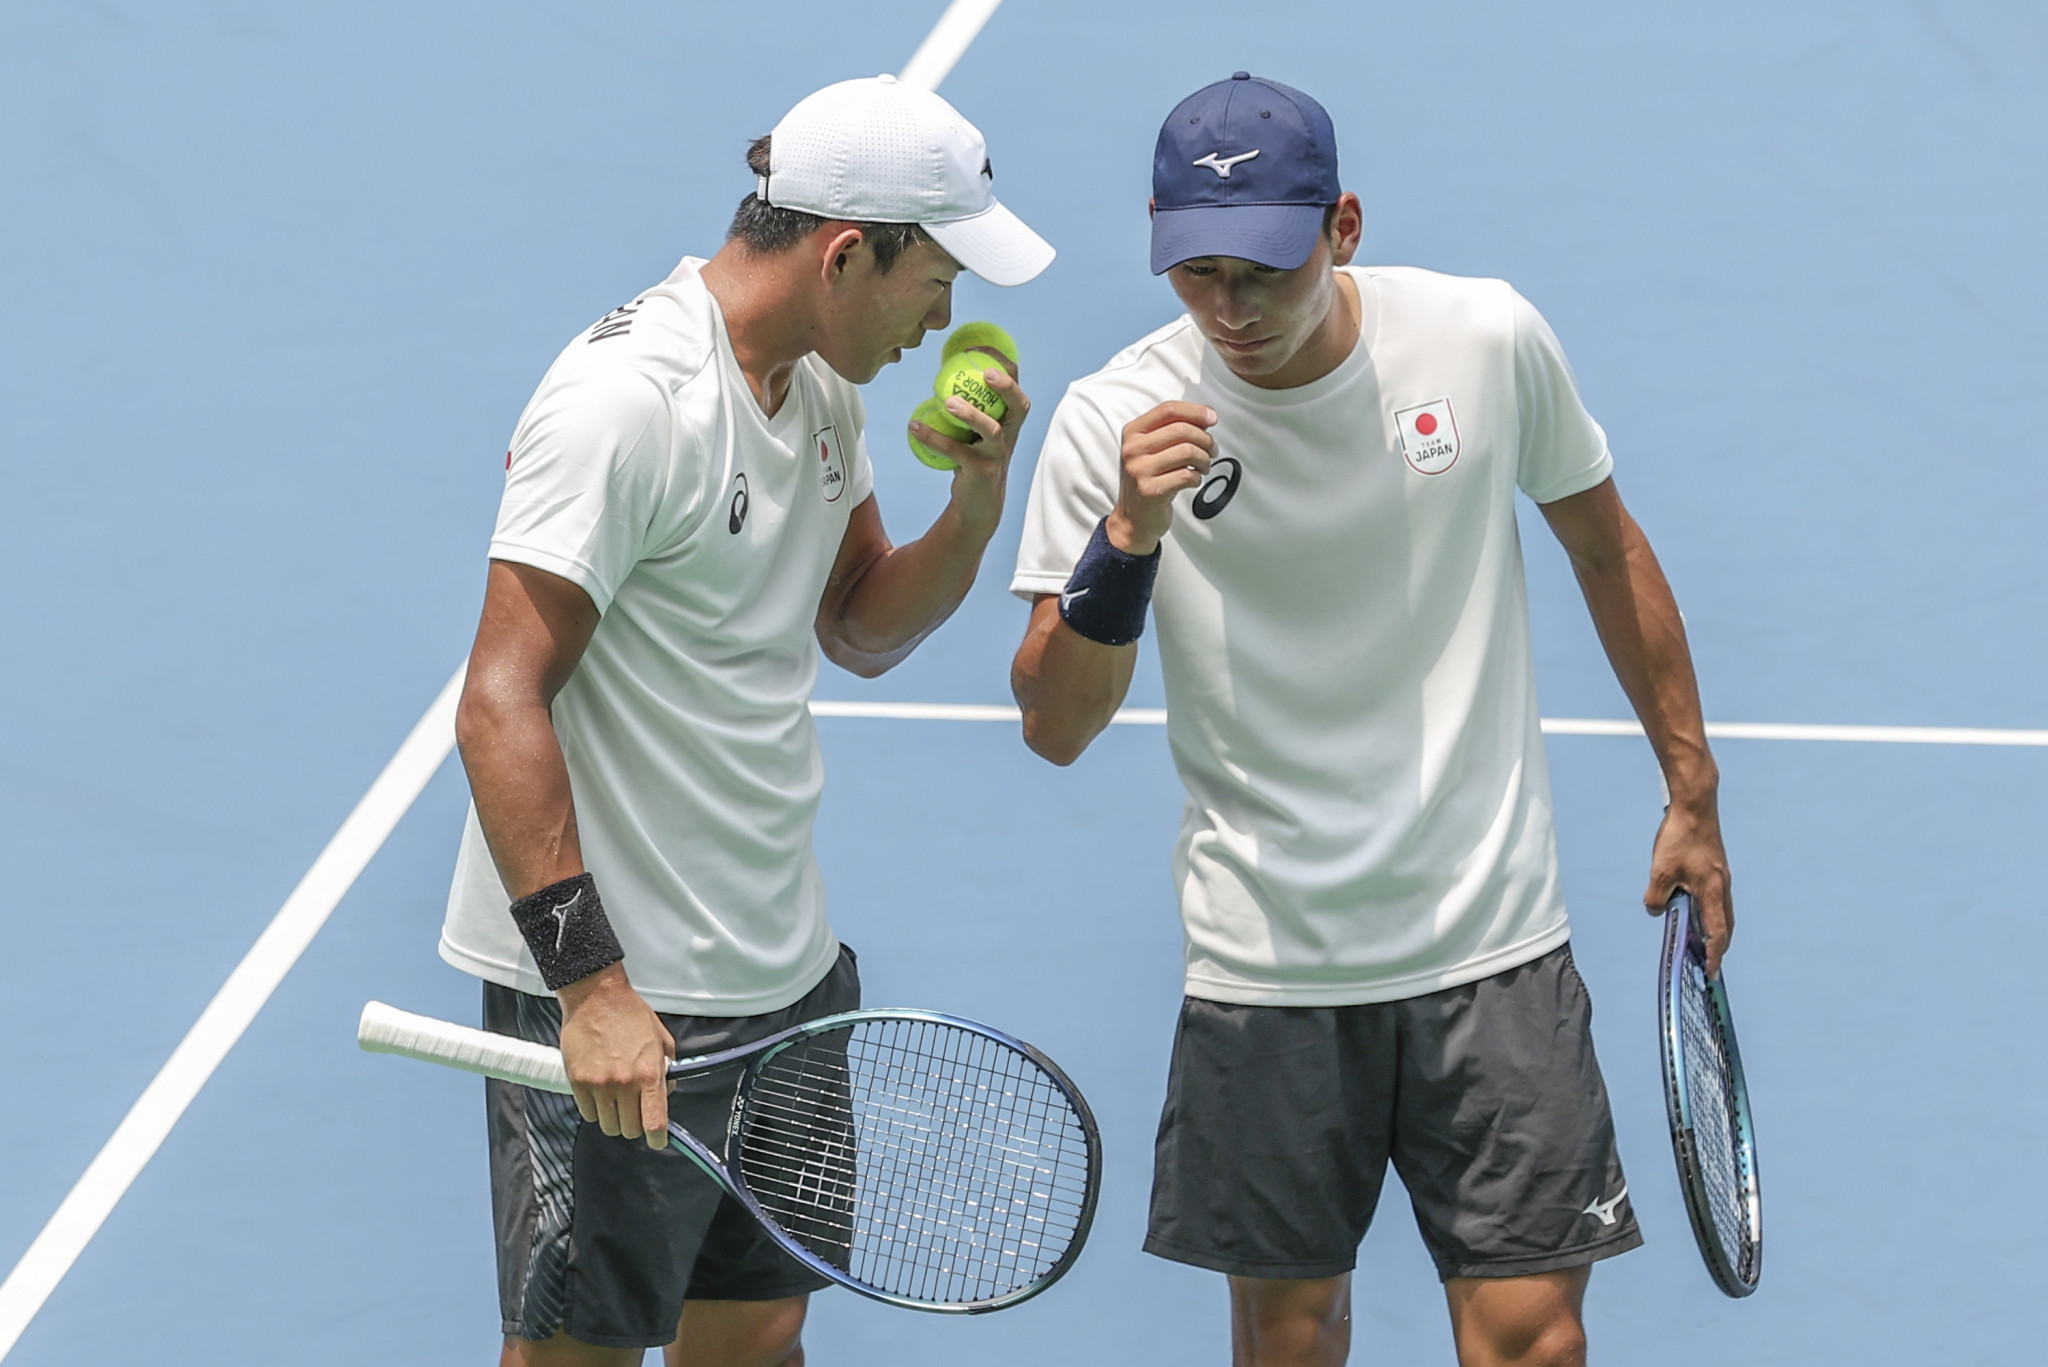 Japanese athletes discuss strategy as men's tennis action continued at Chengdu 2021 today ©FISU 